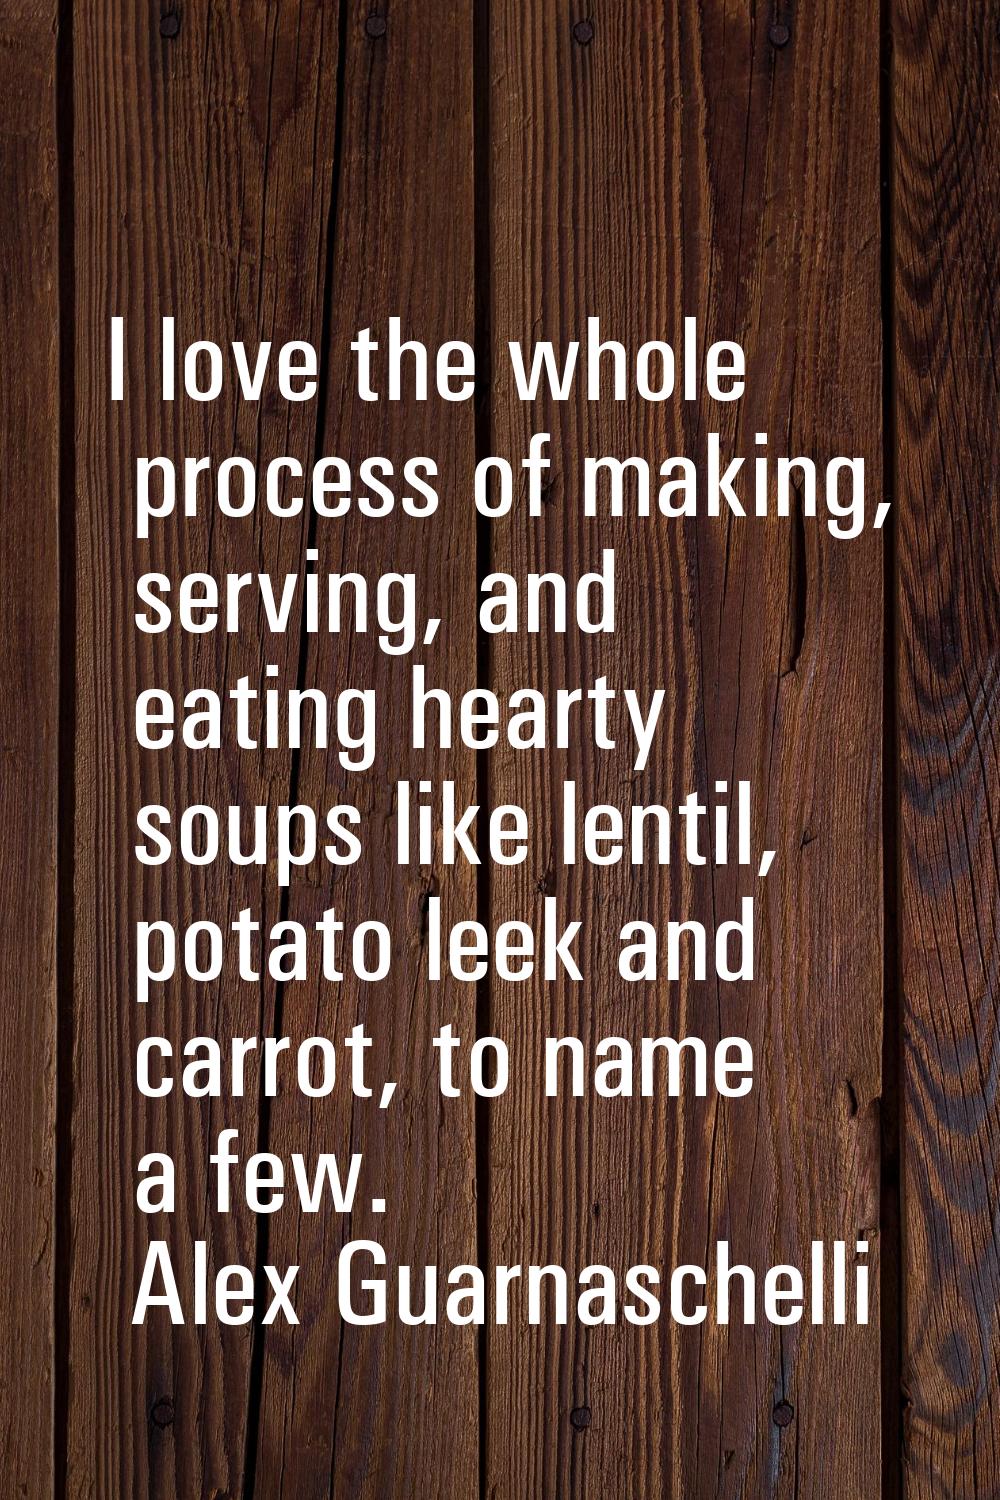 I love the whole process of making, serving, and eating hearty soups like lentil, potato leek and c